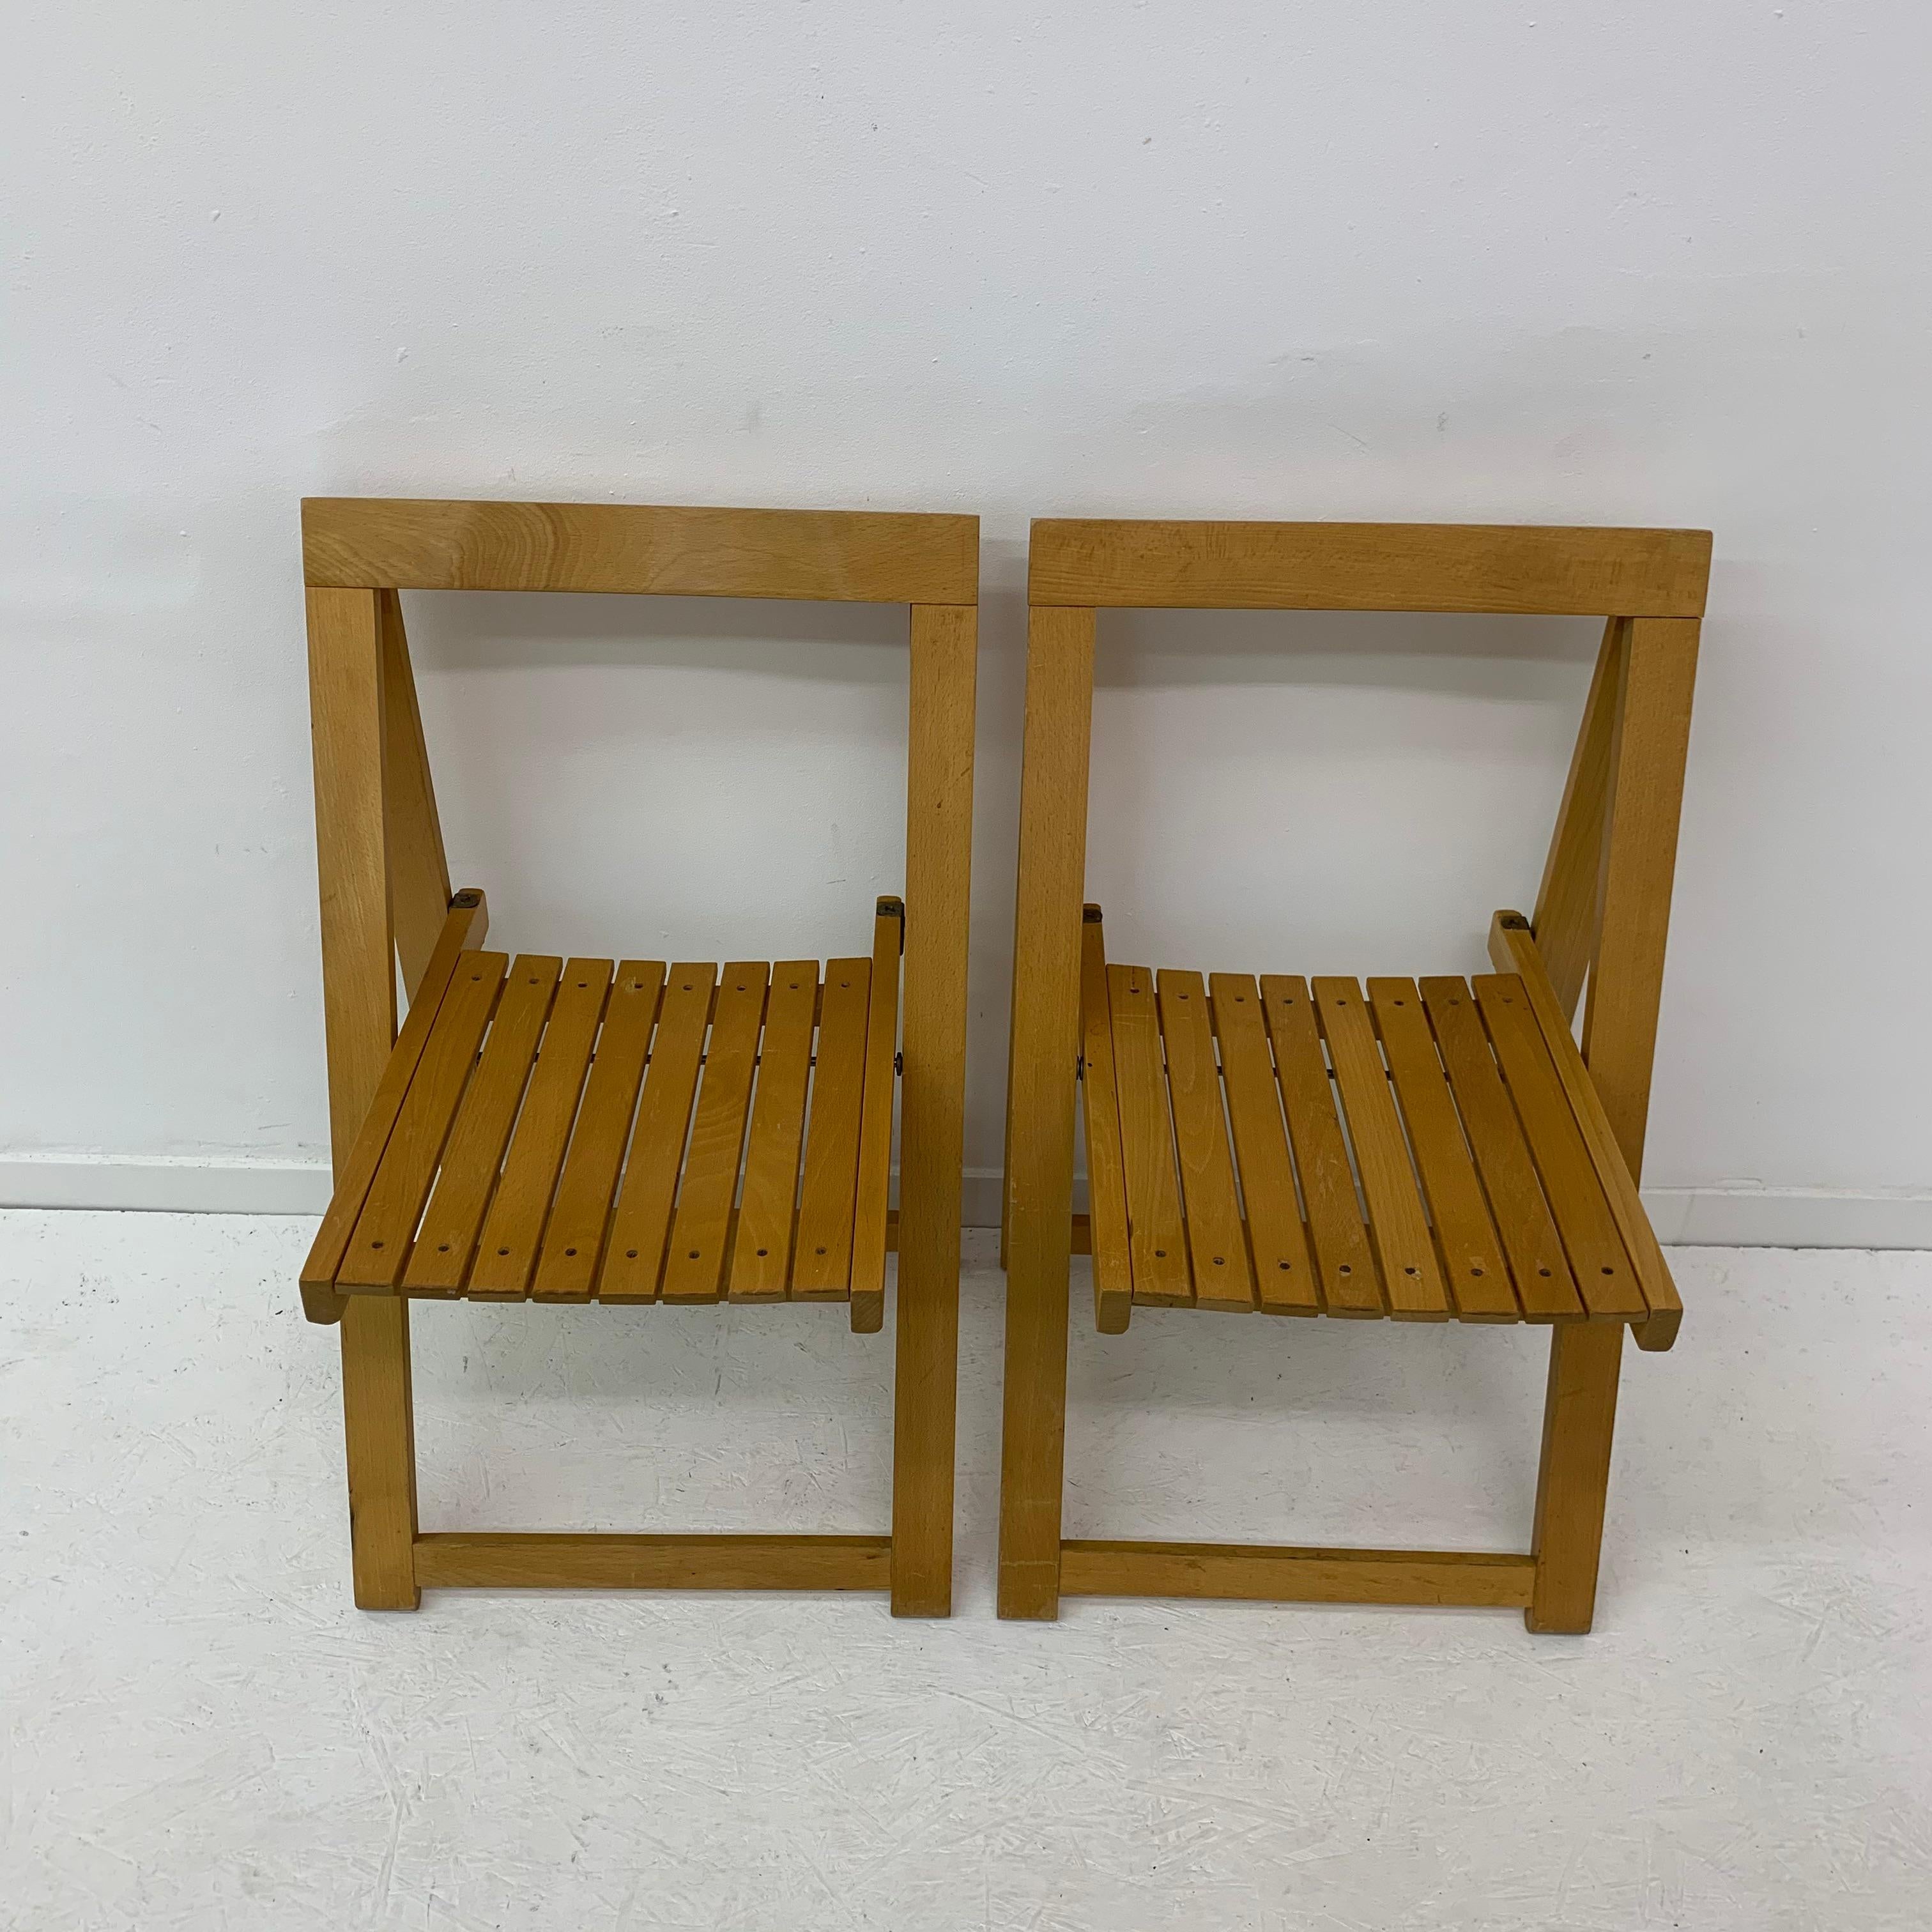 Set of 2 Aldo Jacober for Alberto Bazzani folding chairs, 1960’s For Sale 5